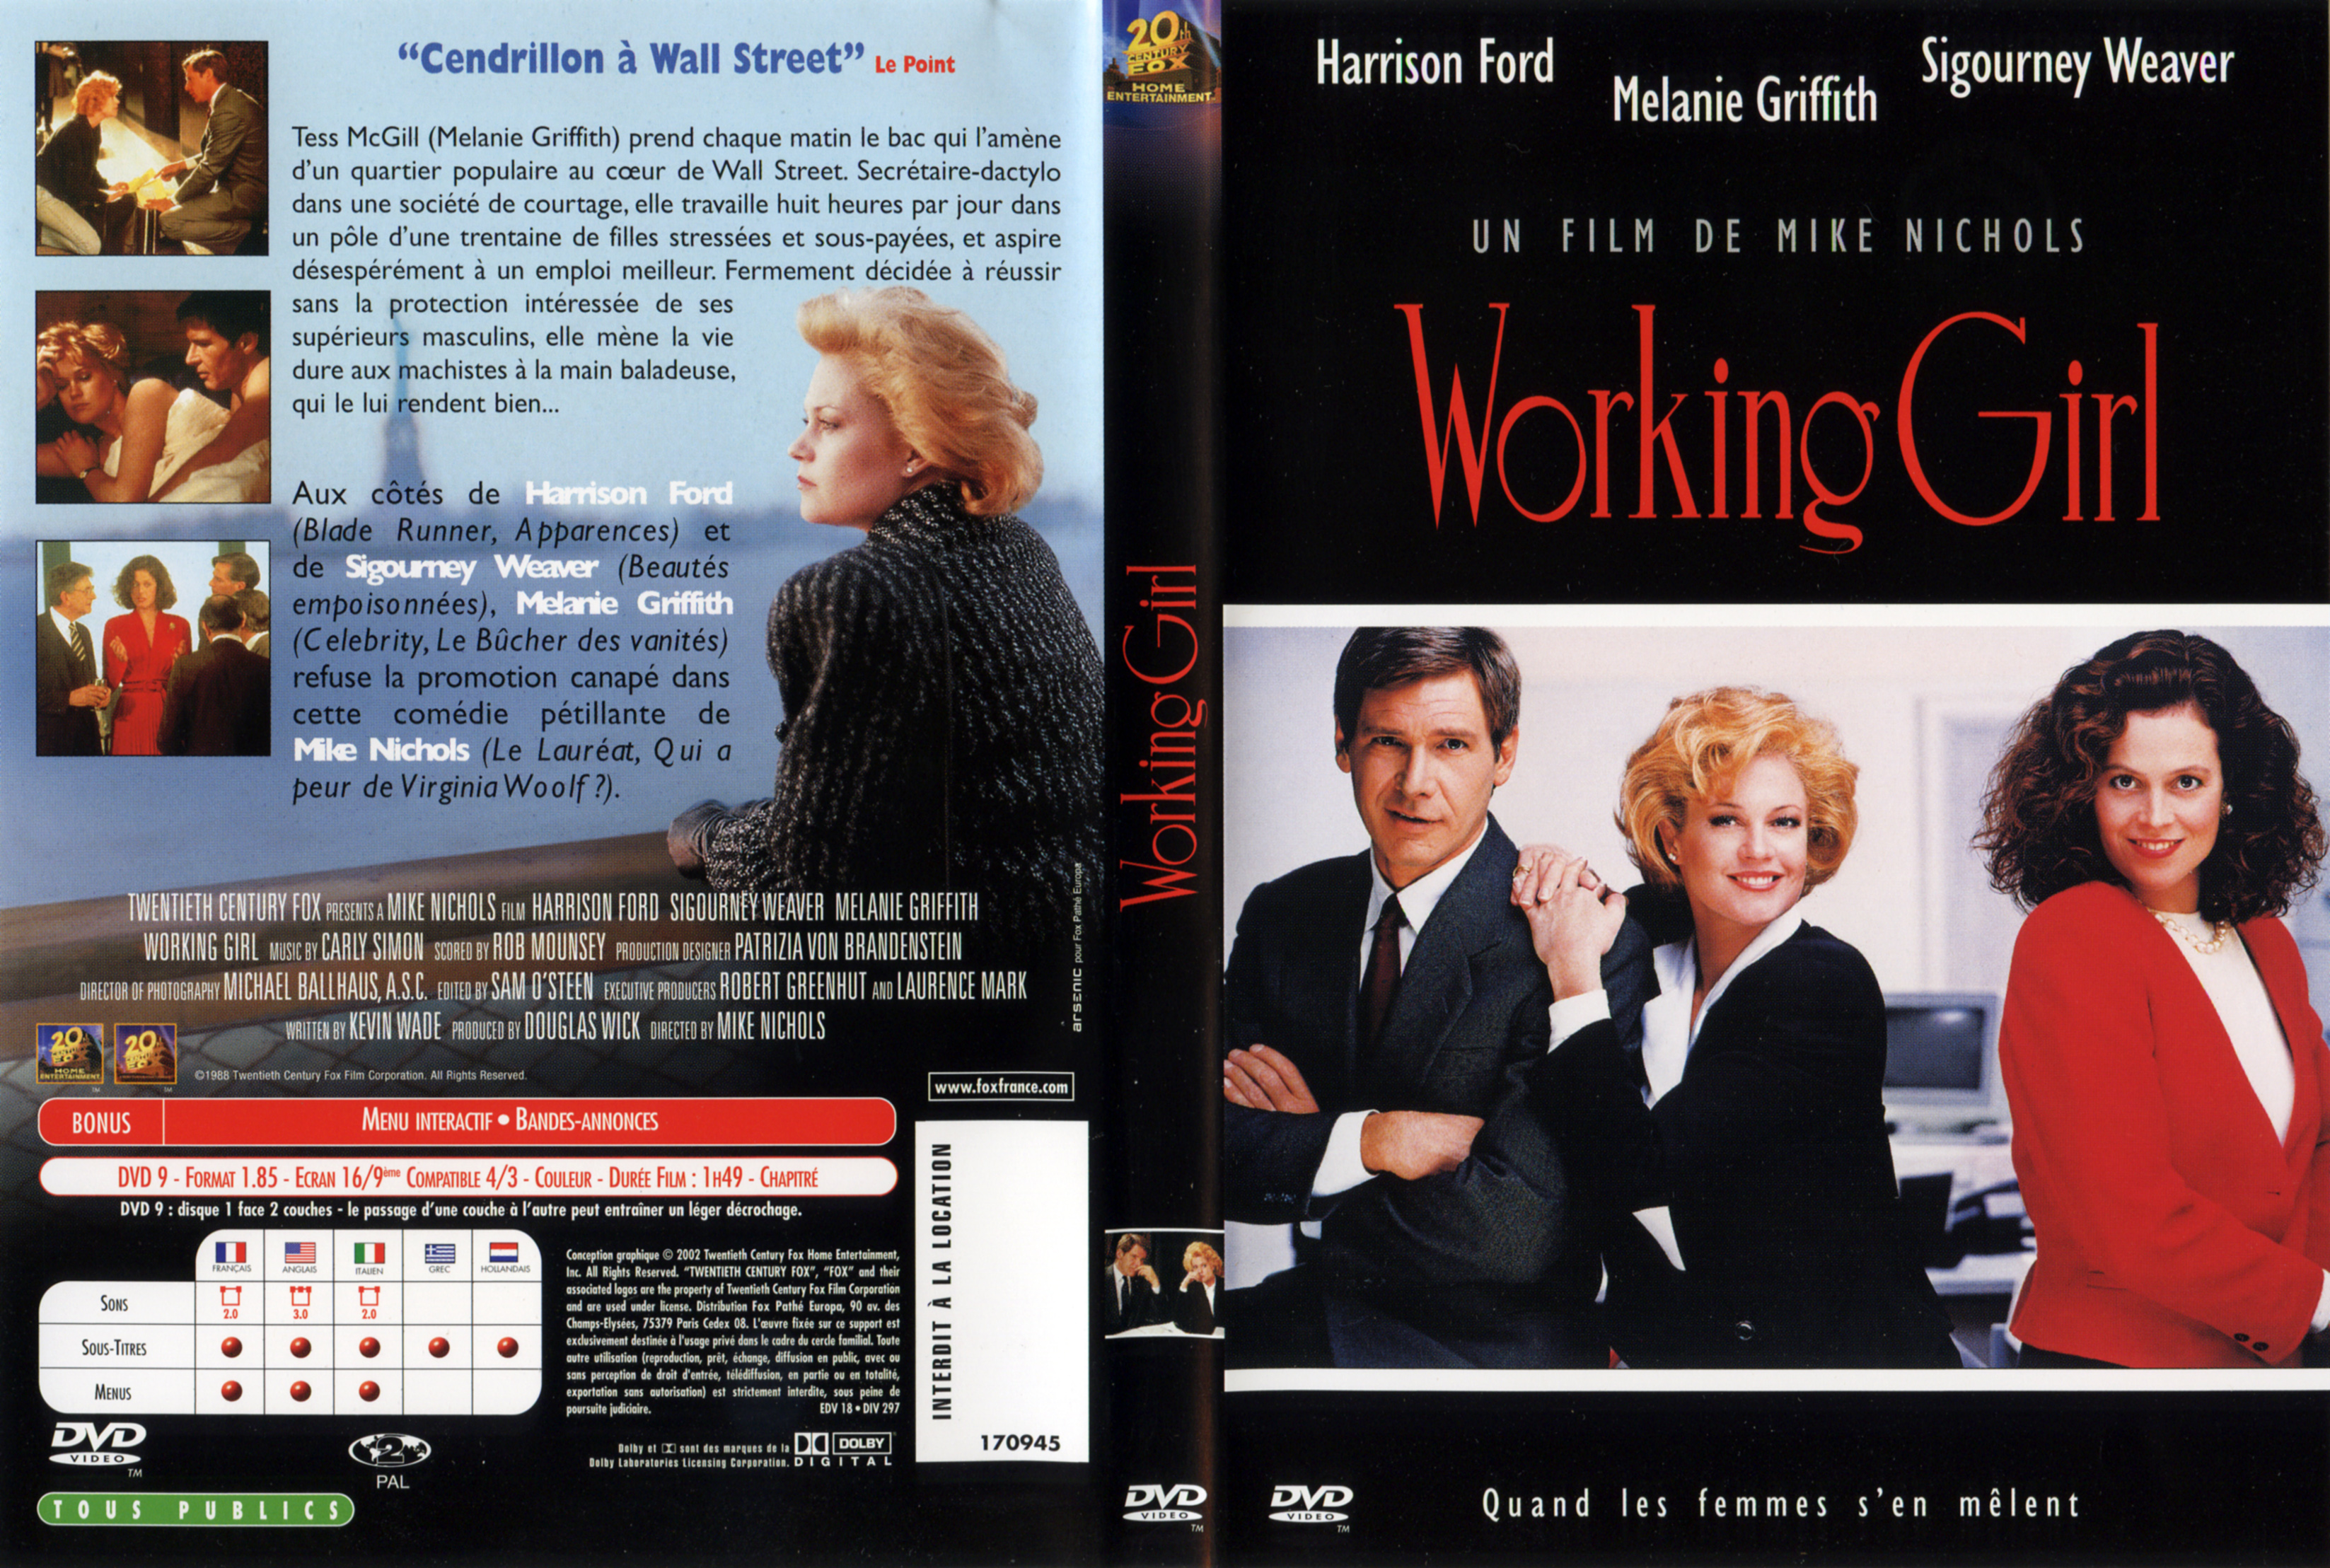 Jaquette DVD Working girl